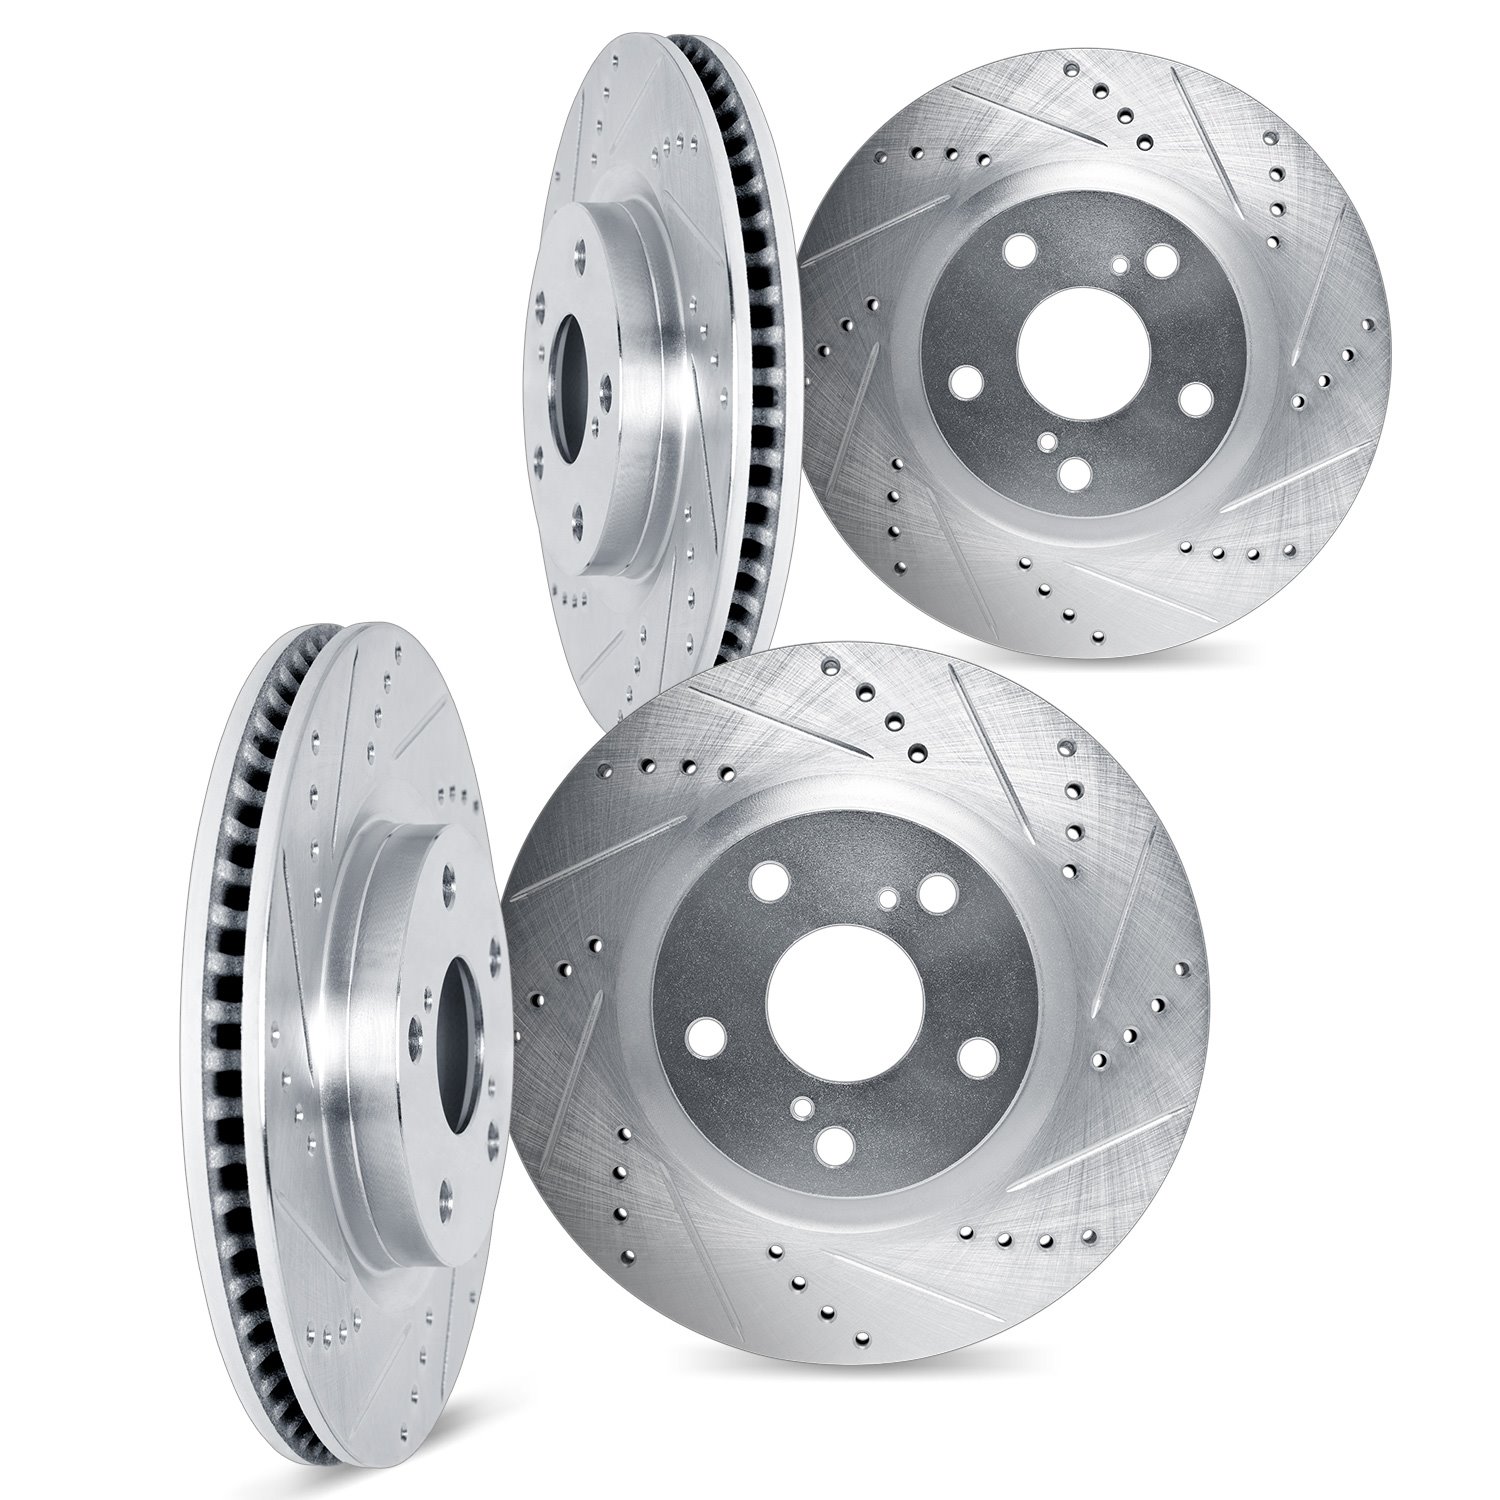 7004-73061 Drilled/Slotted Brake Rotors [Silver], 2004-2009 Audi/Volkswagen, Position: Front and Rear